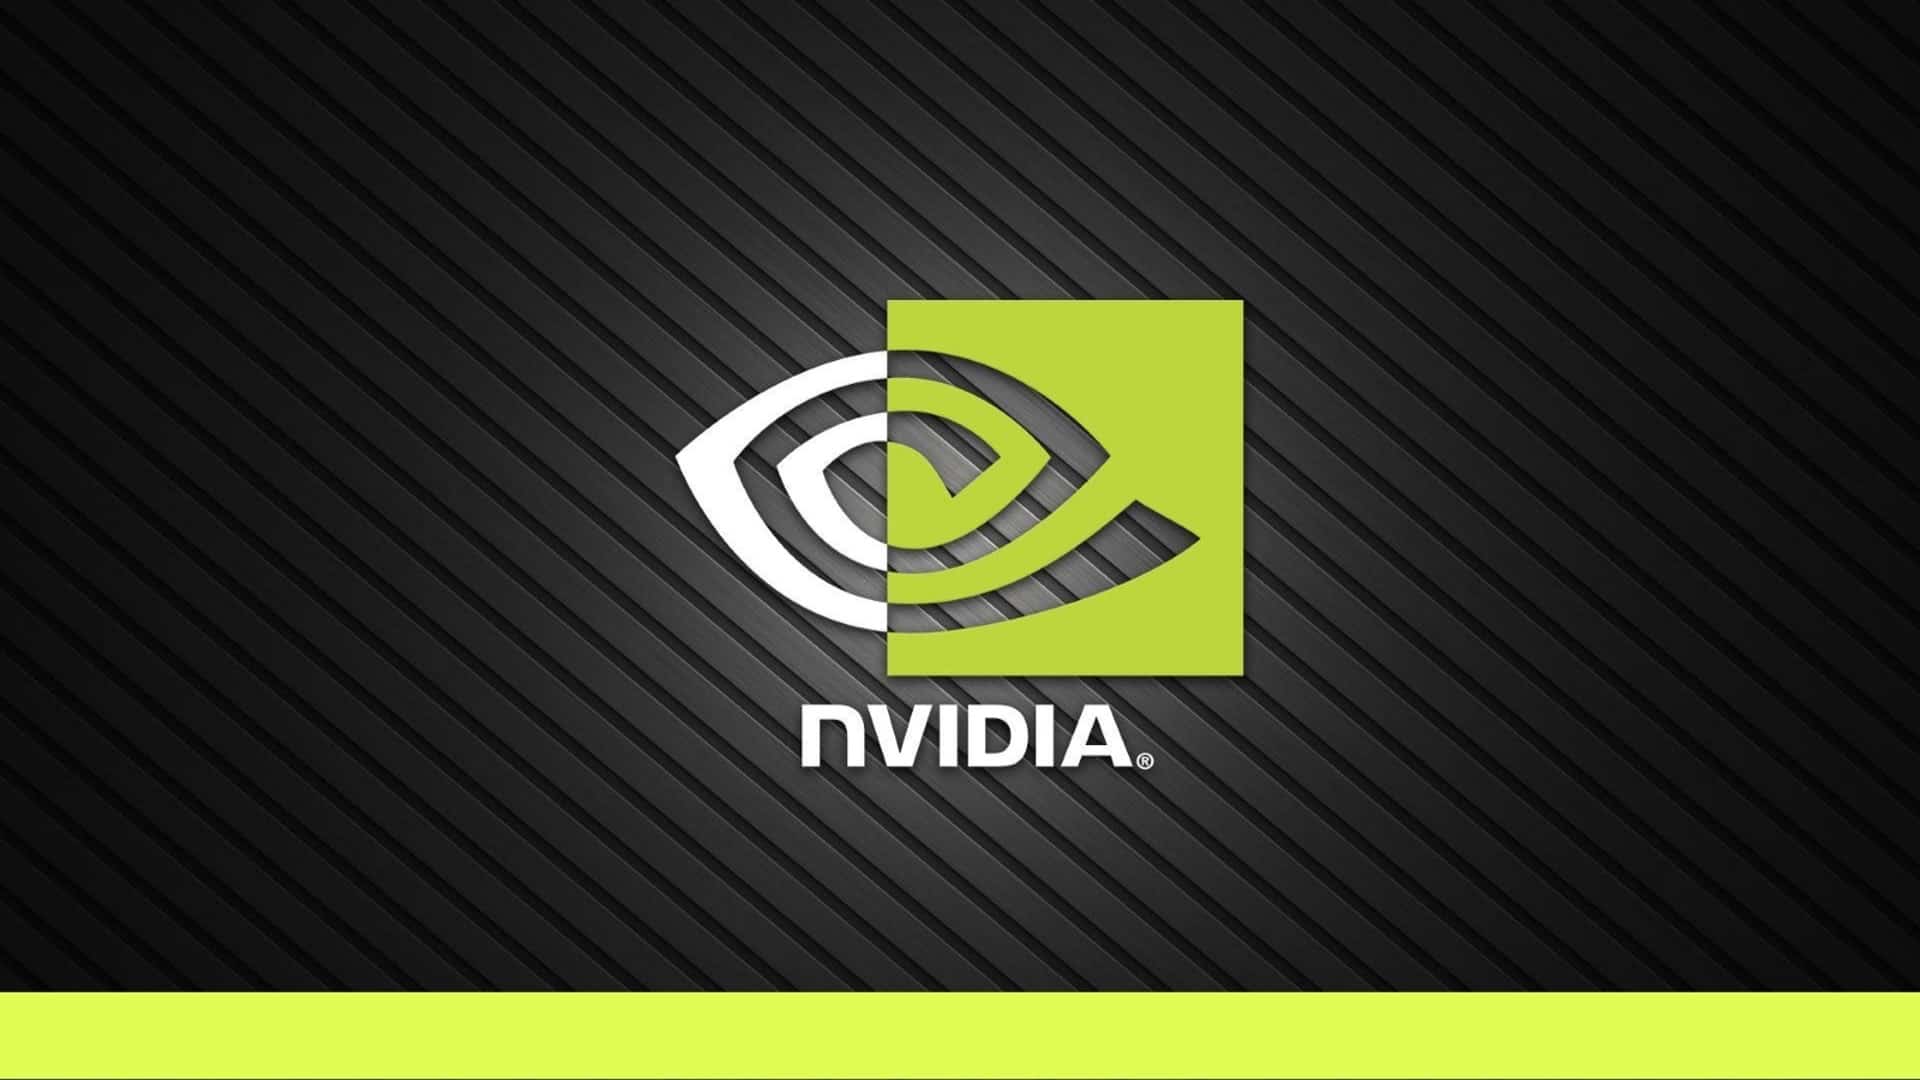 nvidia blockchain nft Speaking to journalists at the Computex IT expo, the CEO of Nvidia Jensen Huang said that he believes we are on the cusp of the blockchain metaverse, which is basically a is a virtual-reality-based world where people can interact with each other.